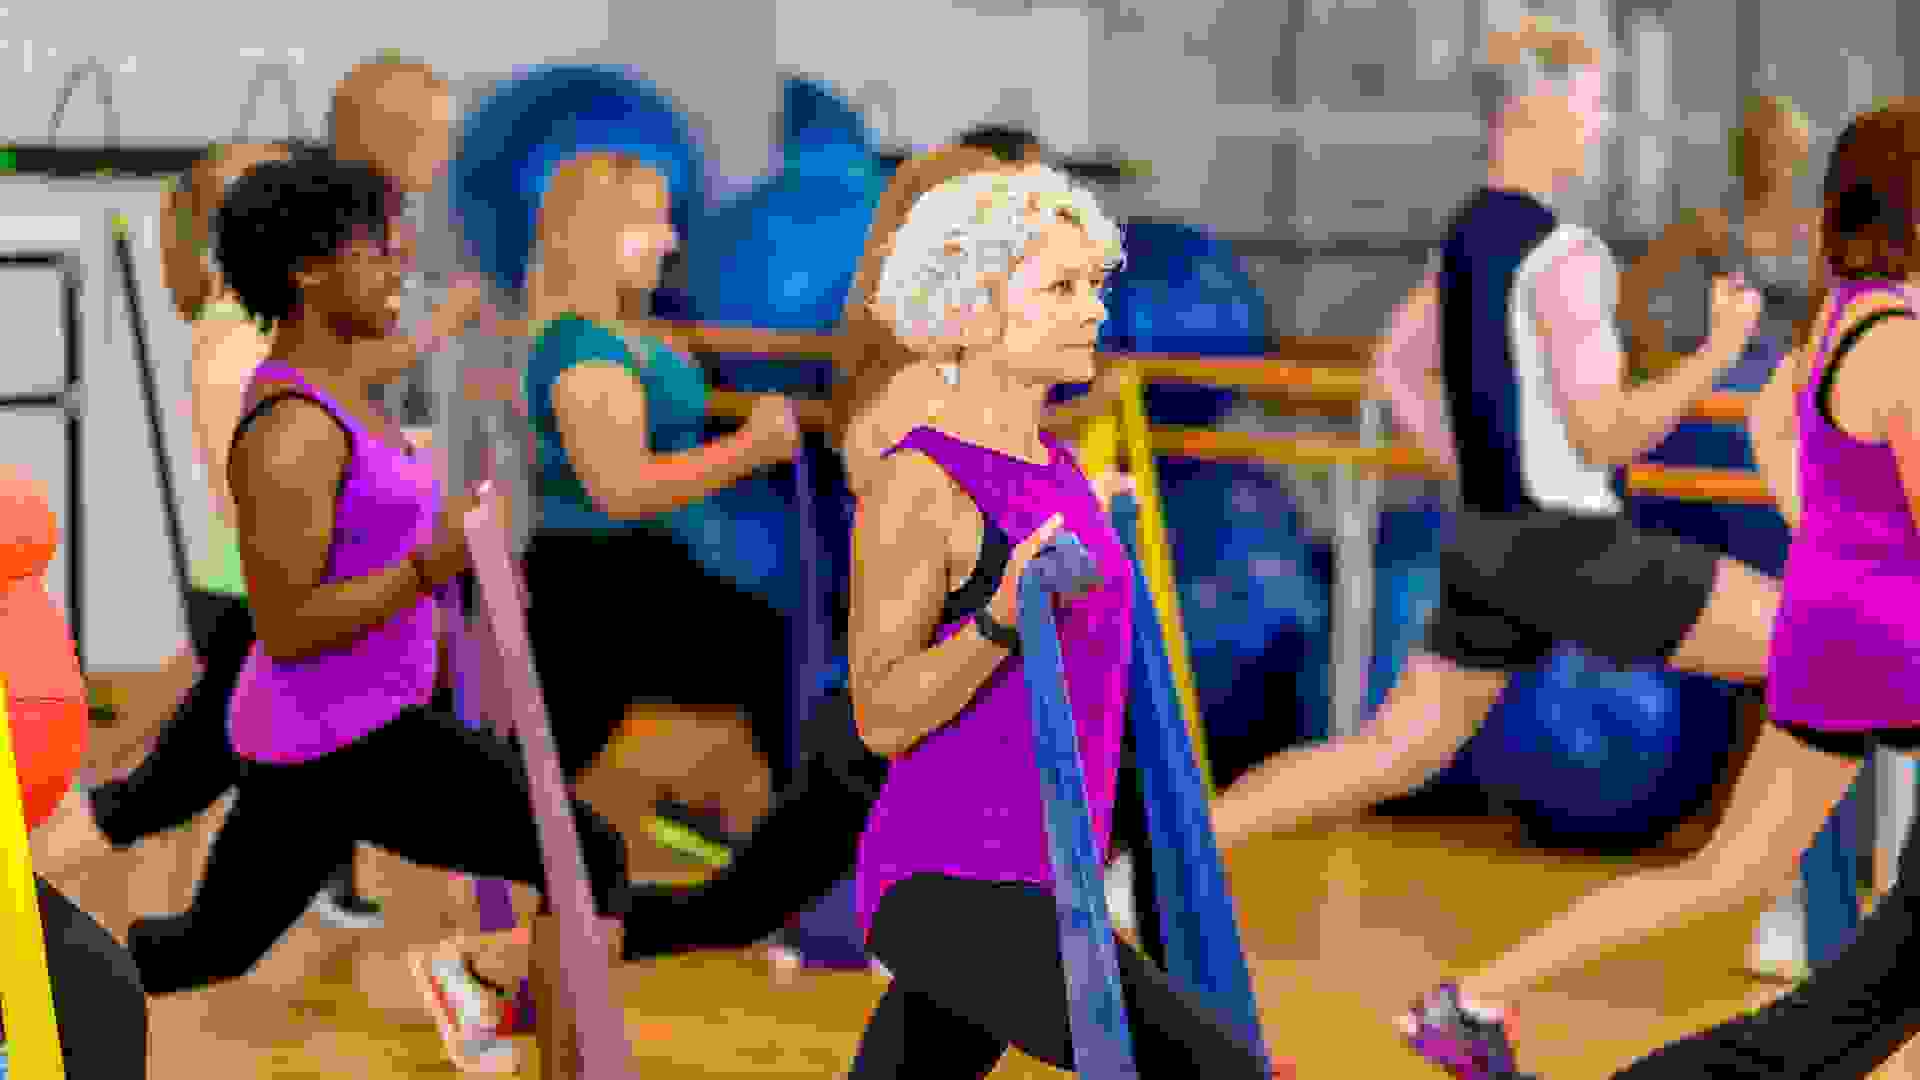 A multi-aged and multi-ethnic group of adults using elastic bands to help their strength training workout in a fitness class at a community complex.